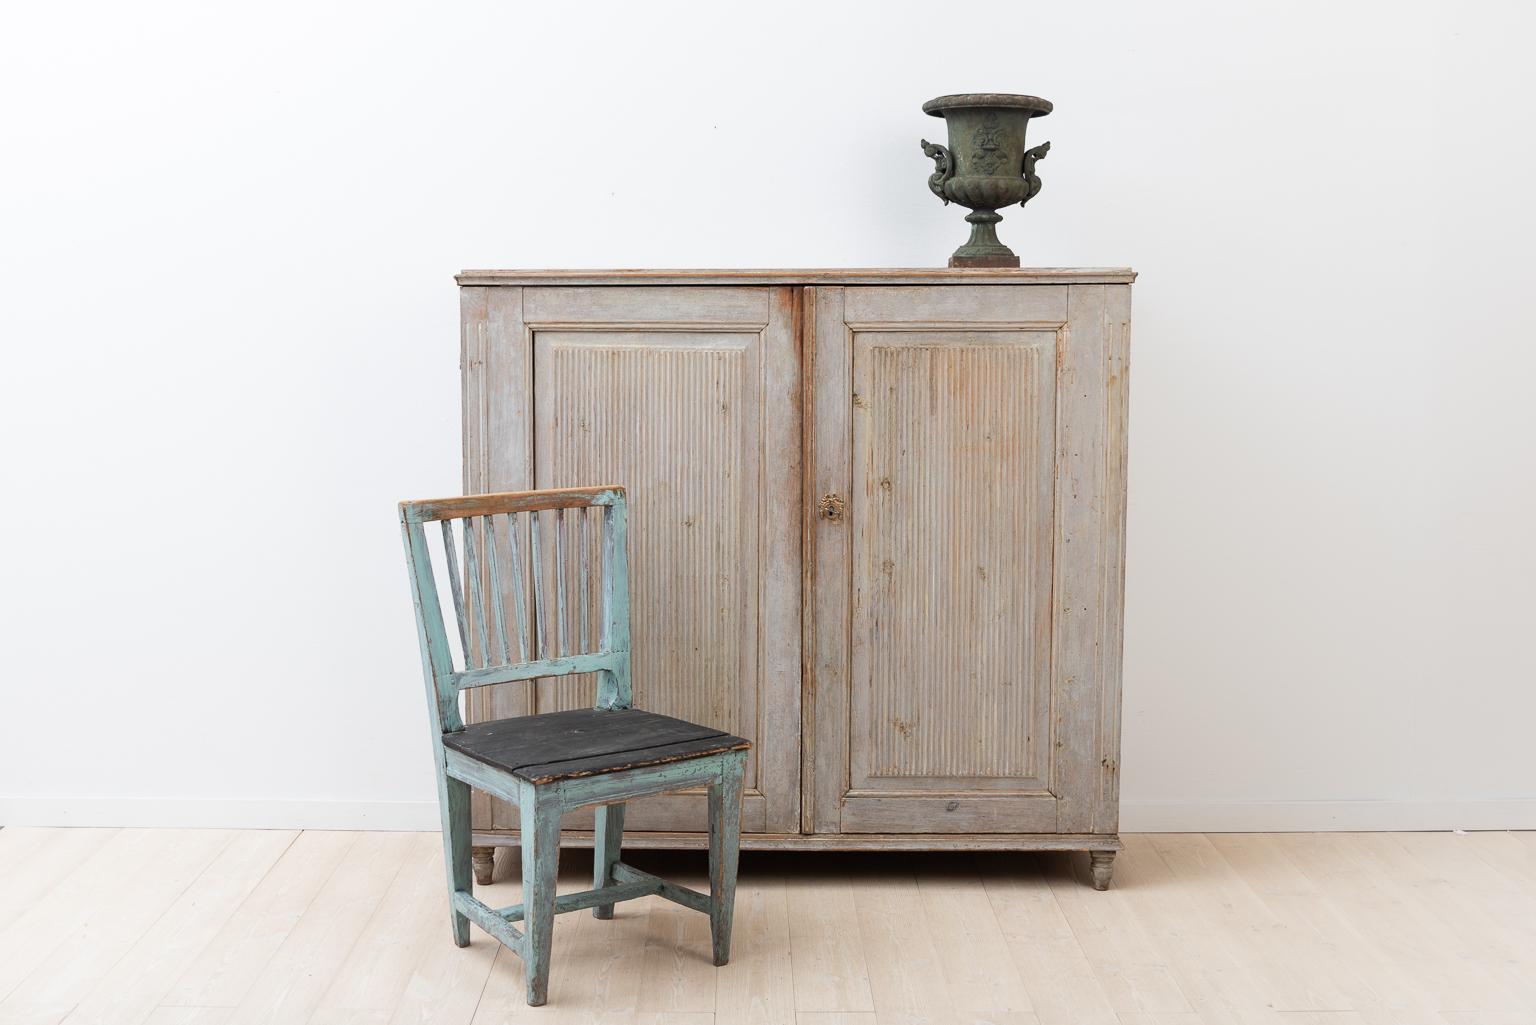 Provincial Swedish Gustavian sideboard. The interior is original with the original holders for spoons. The doors are decorated with ribbs. The sideboard as had minor touch ups trough the years. Fully functional lock and key. Manufactured circa 1790.